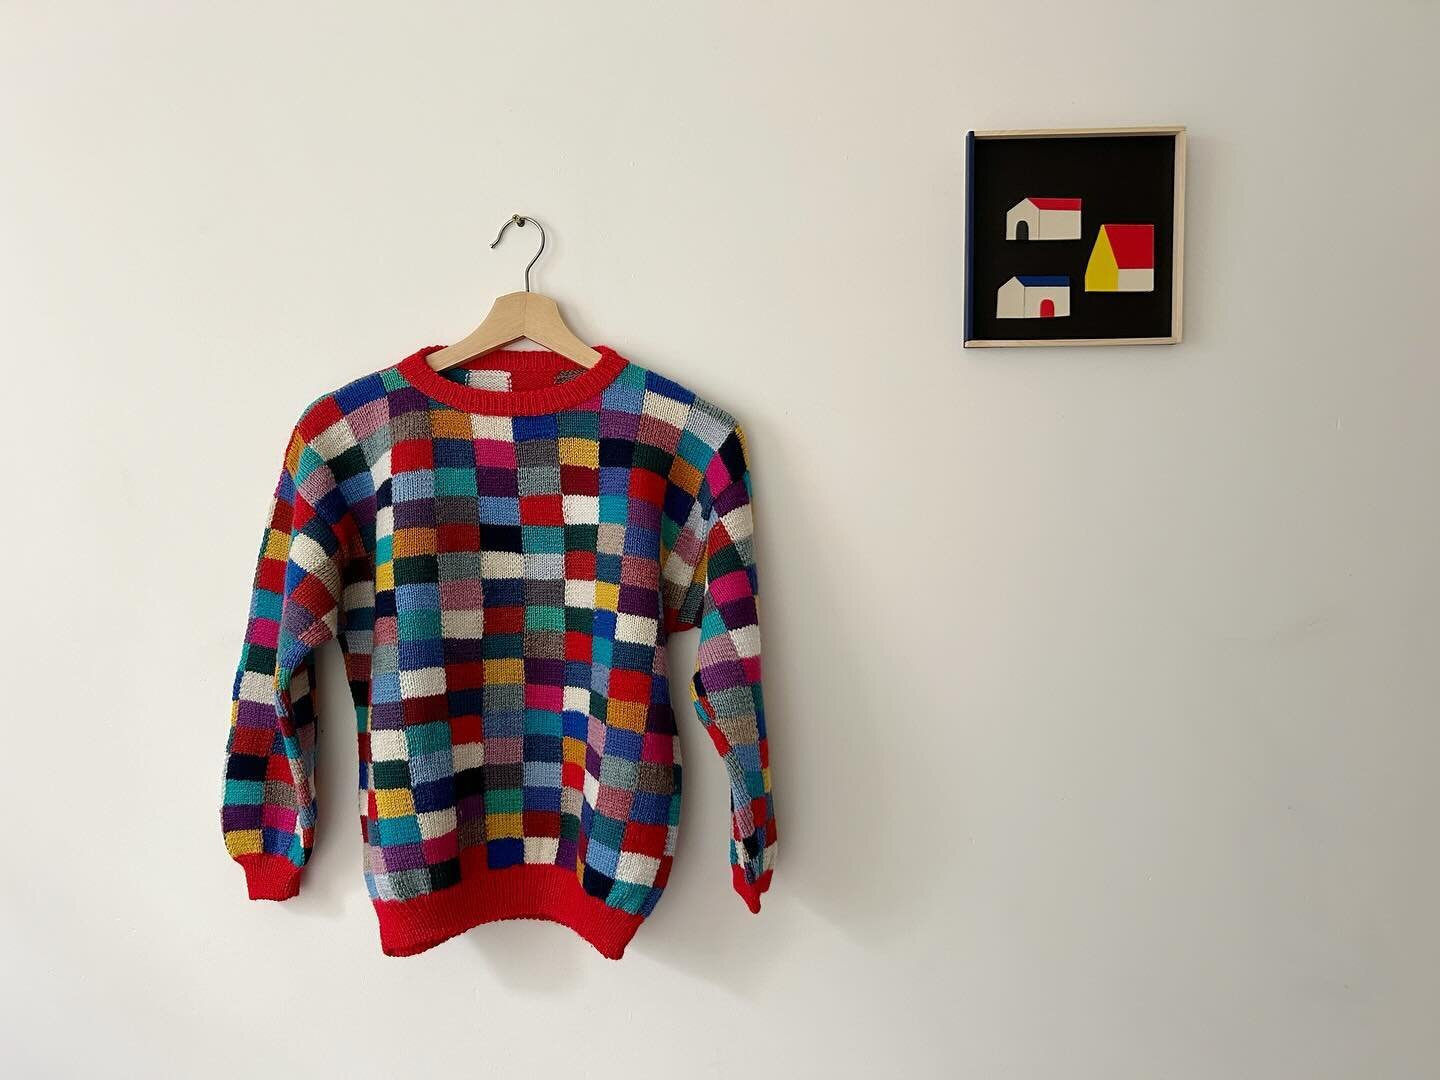 Old and new. Old jumper my mum made and I wore in year 4 and a new artwork from my friend @ulrikeleamoormann.